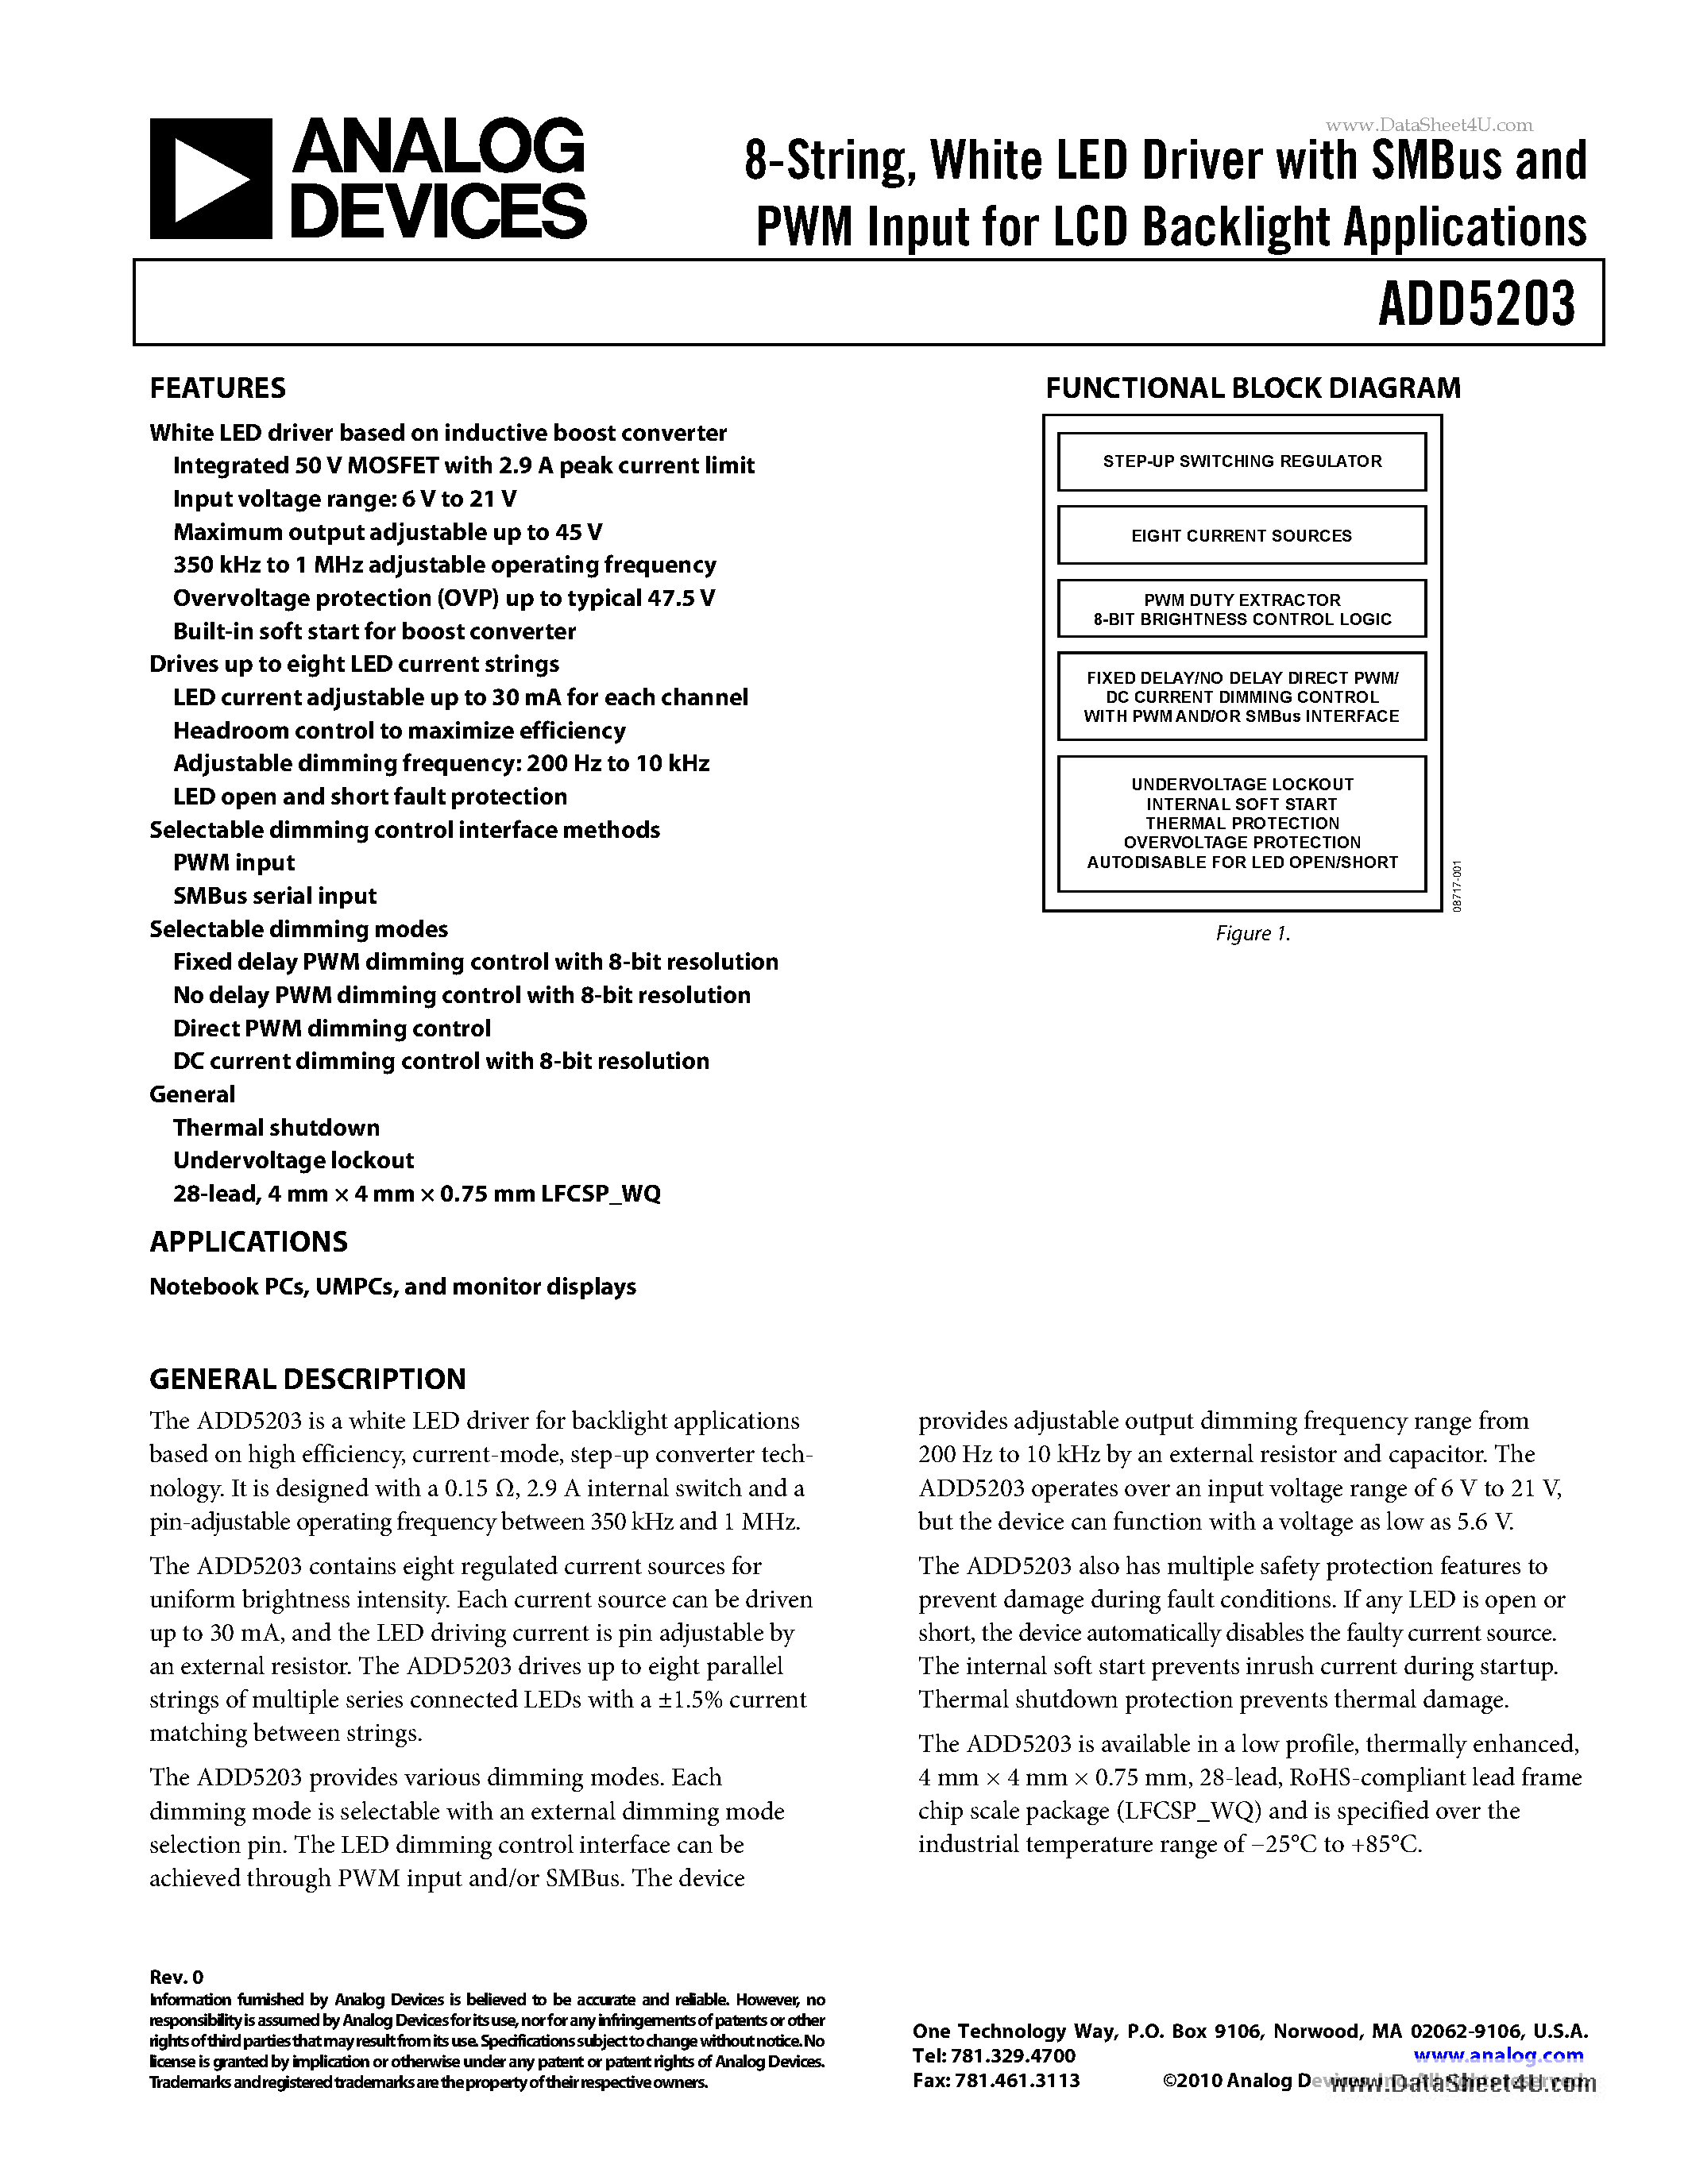 Datasheet ADD5203 - White LED Driver with SMBus and PWM Input page 1